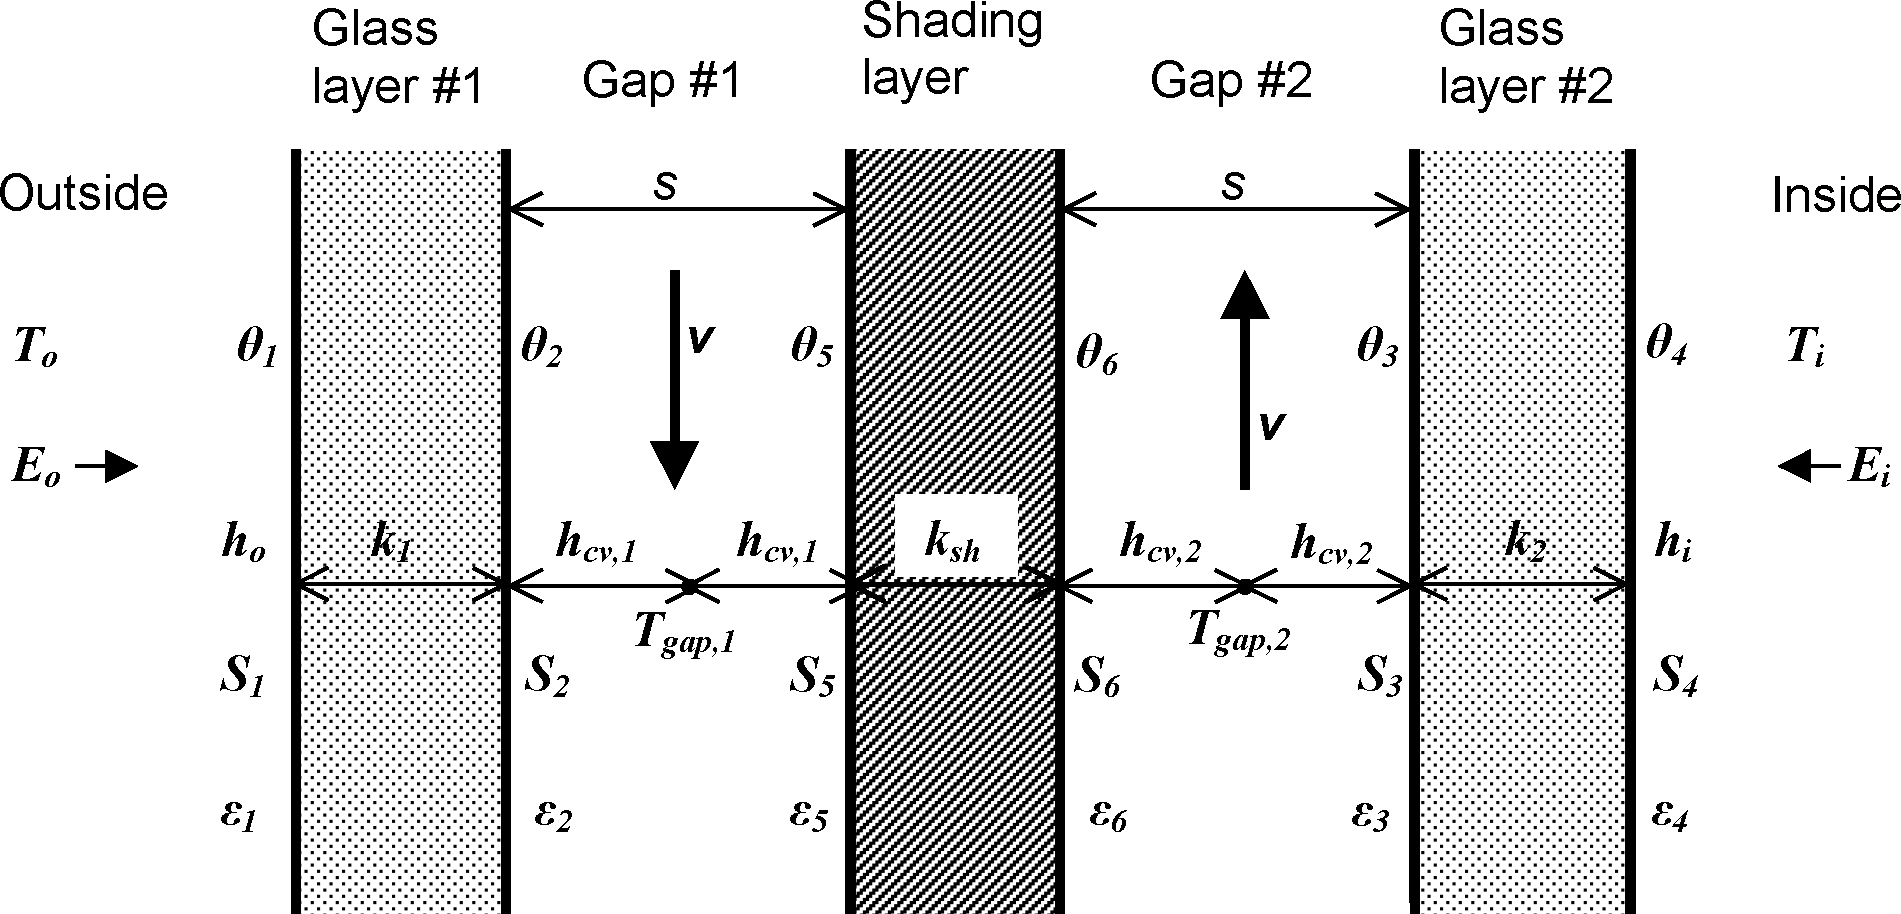 Glazing system with two glass layers and a between-glass shading device showing variables used in the heat balance equations.